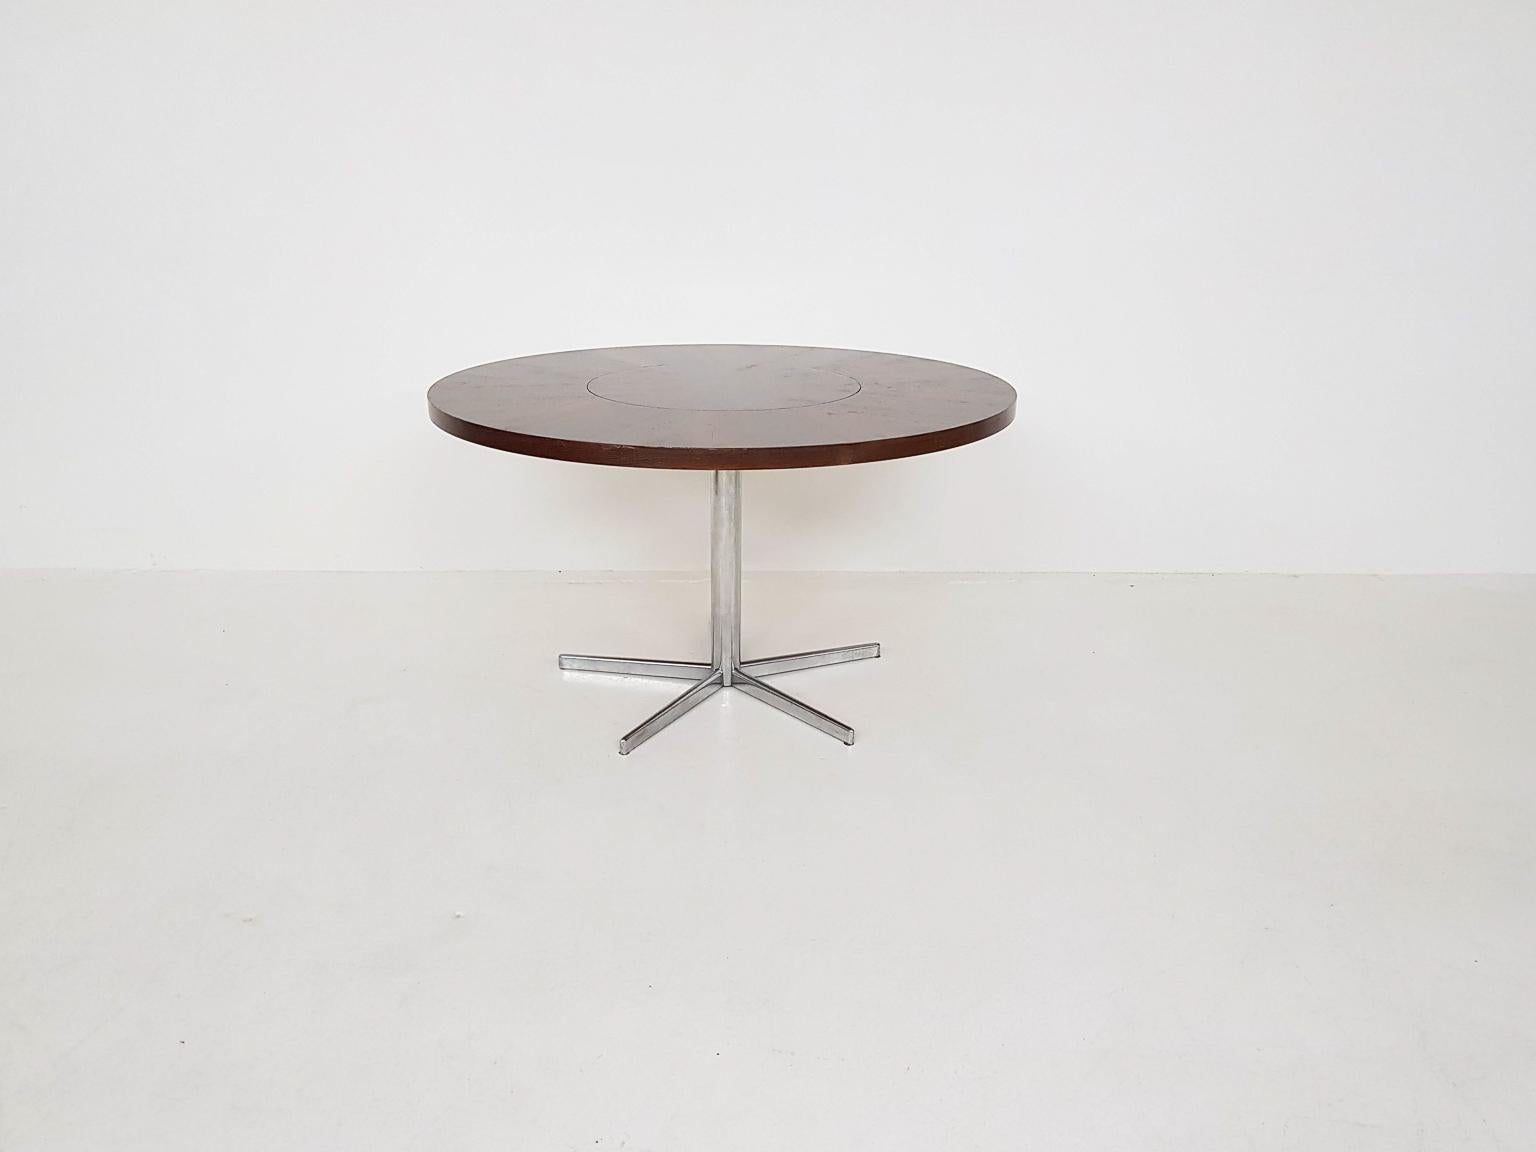 A unique pedestal dining table with a rotating centre, made of rosewood veneer on a metal, chromed base. This table is made by the German manufacturer Emü in the 1960s.

The top of the table consists of two parts. The outer rosewood circle is